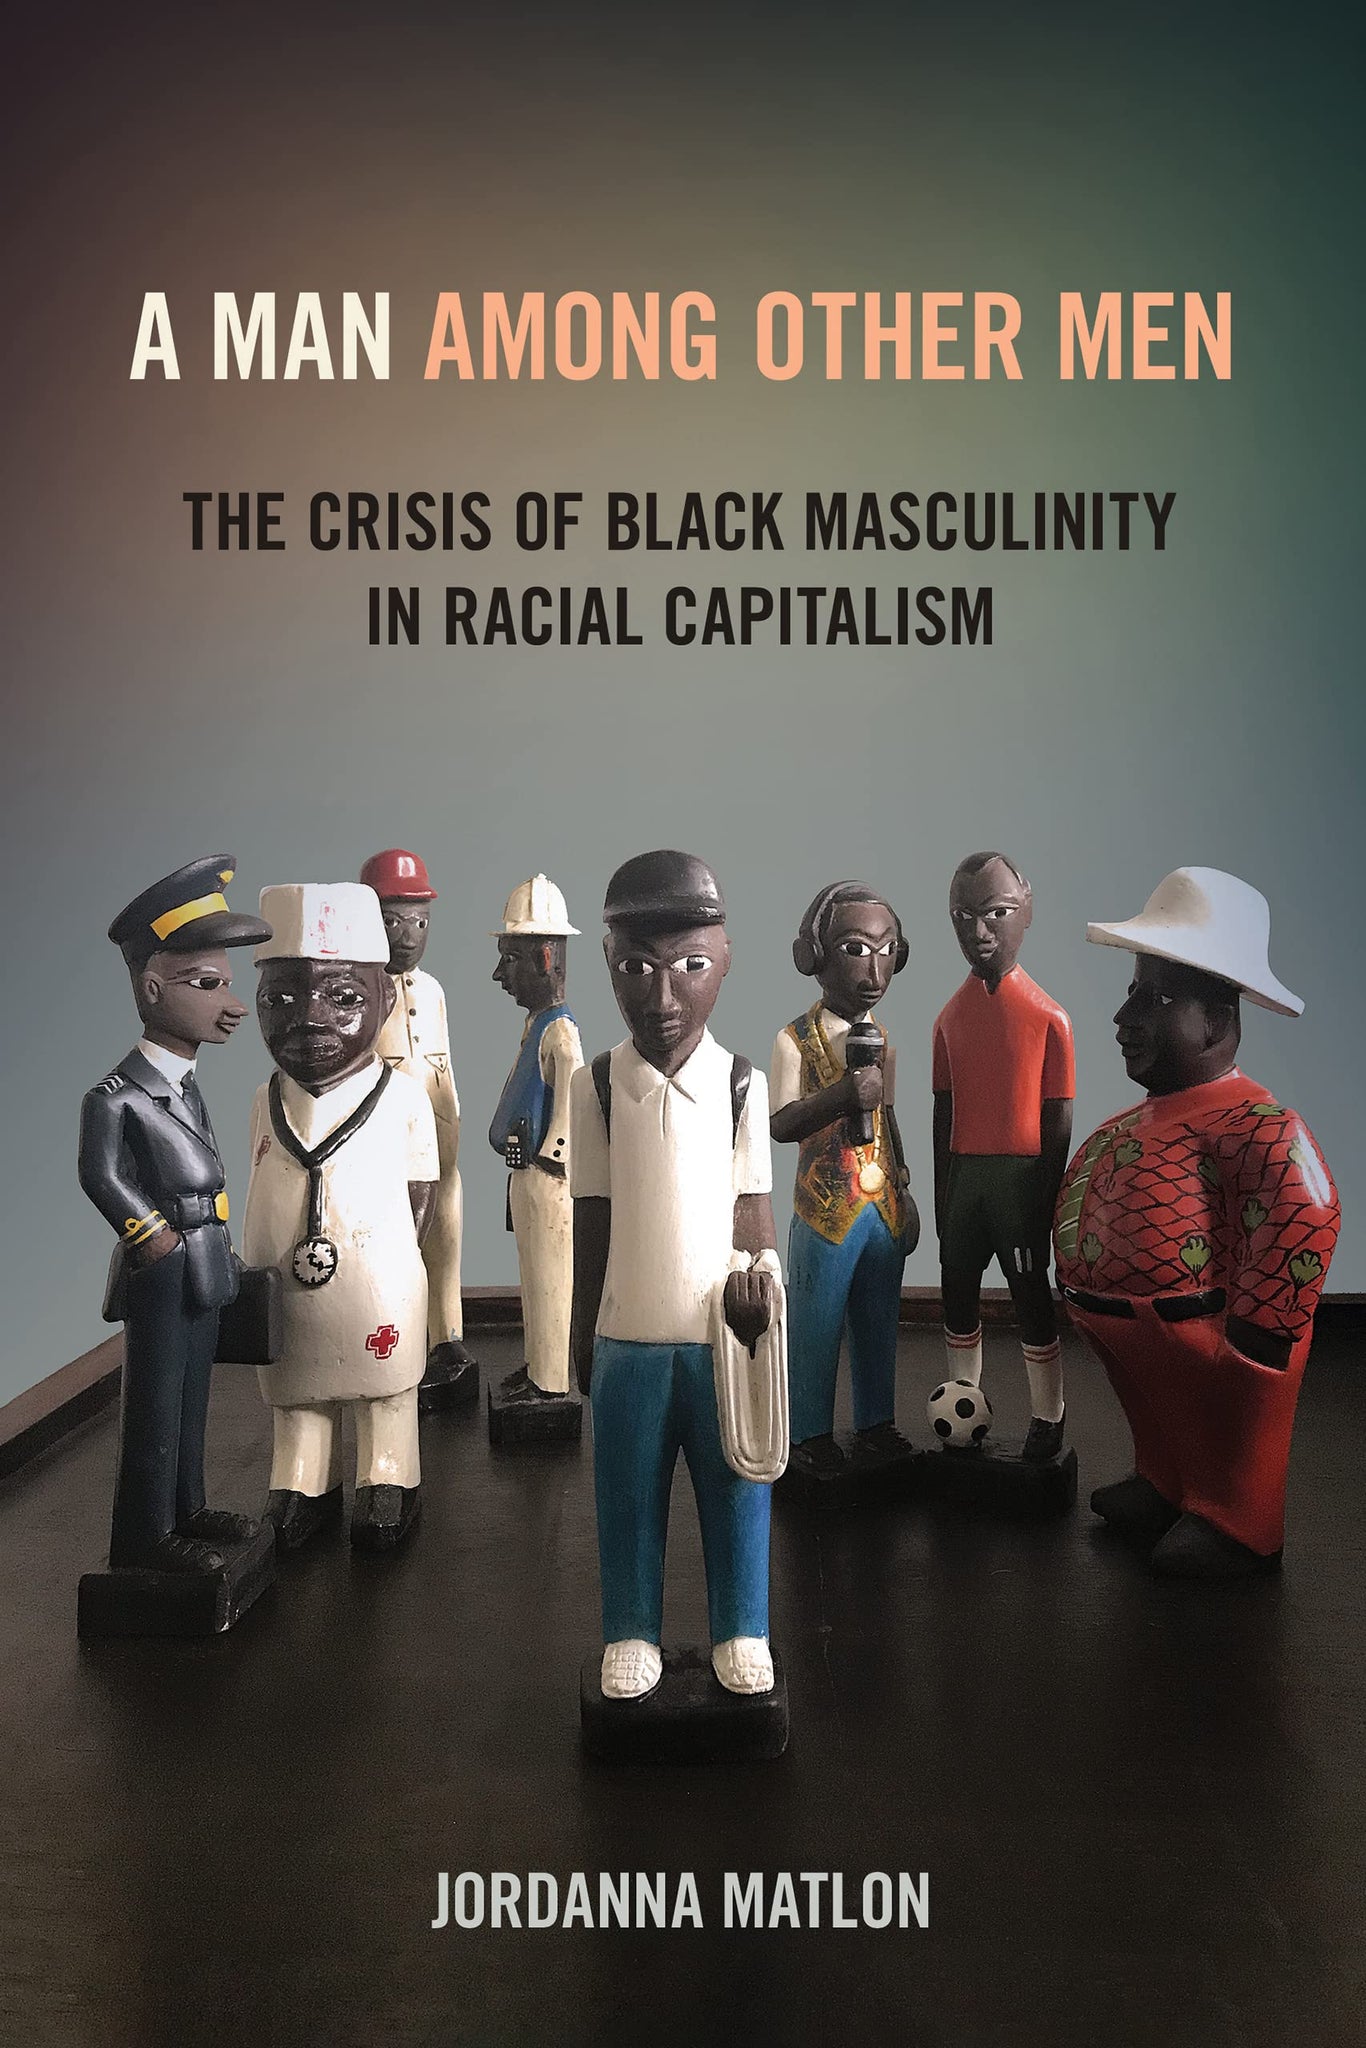 A Man Among Other Men: The Crisis of Black Masculinity in Racial Capitalism (Paperback)